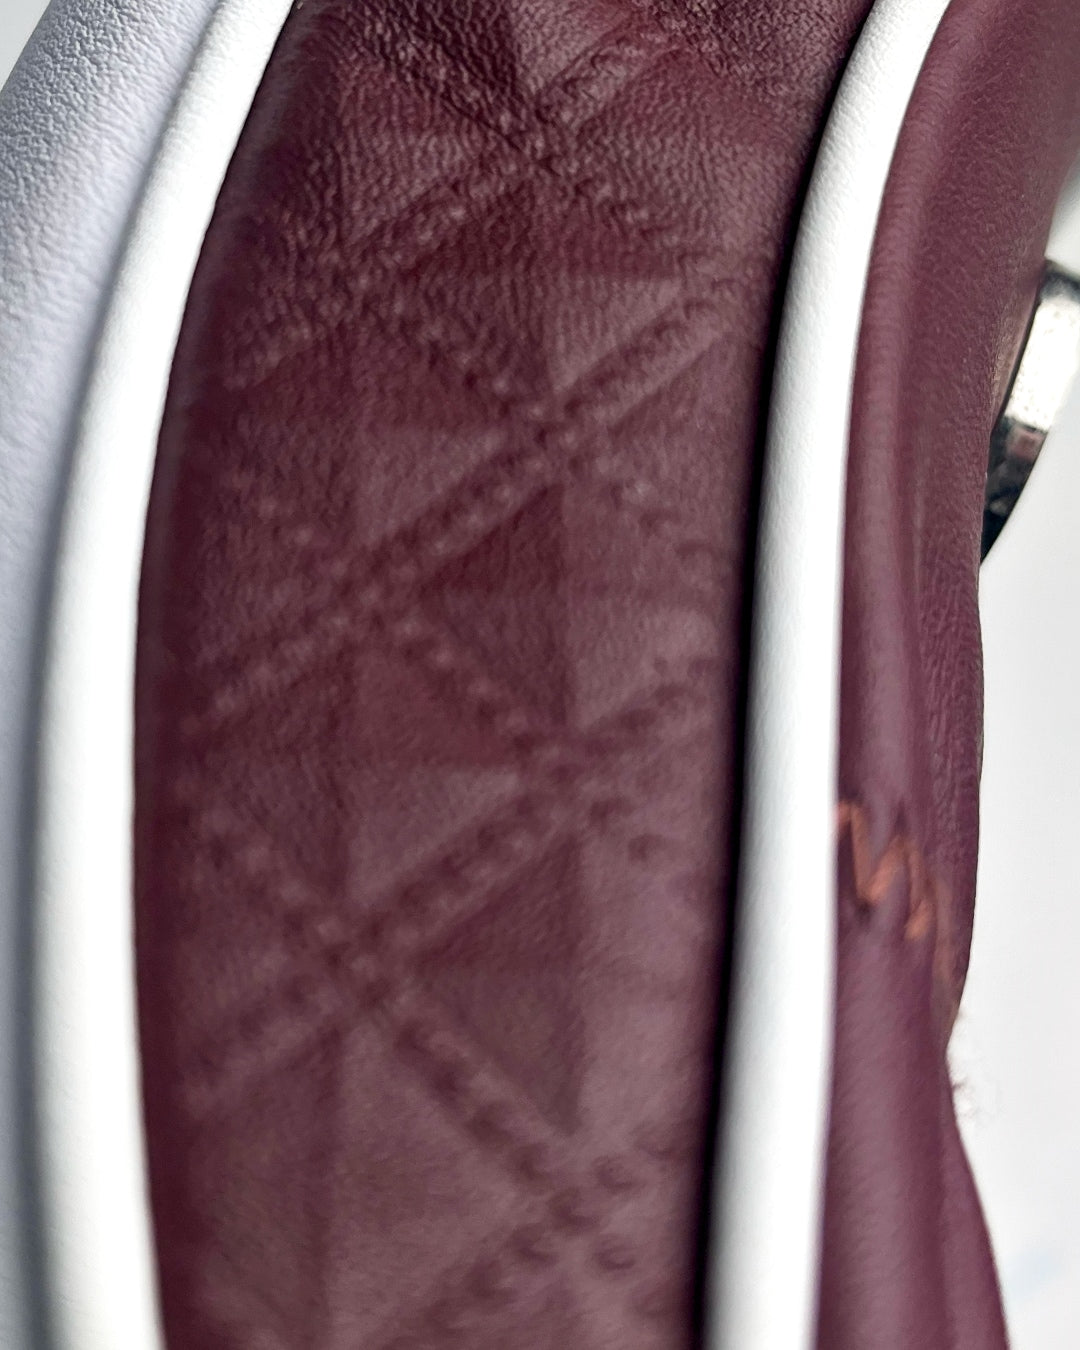 Diamond side emboss from white and burgundy leather fairway wood headcover by David Alexander